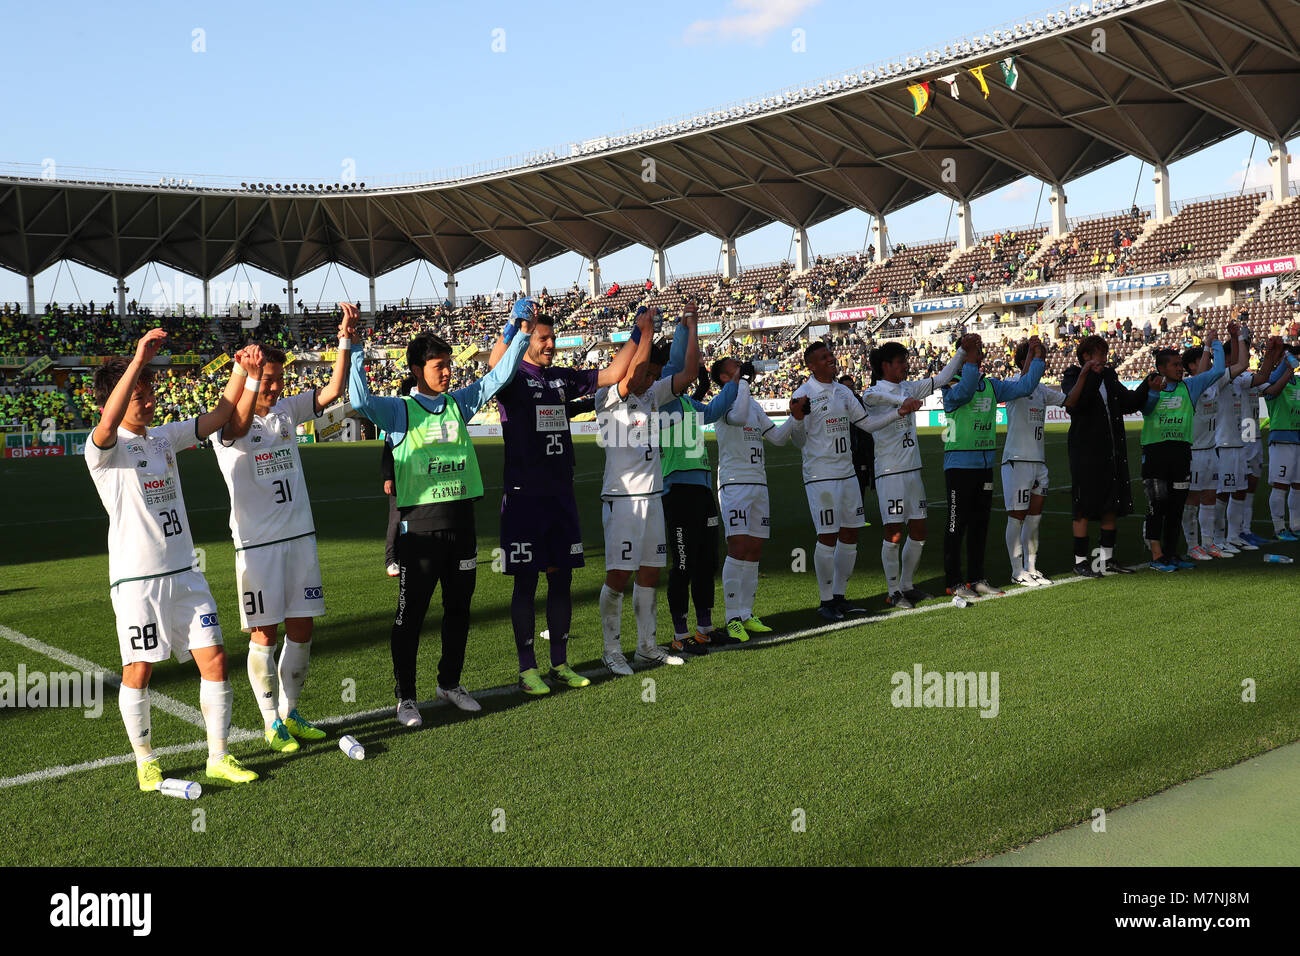 Jef United Chiba Team Group March High Resolution Stock Photography And Images Alamy